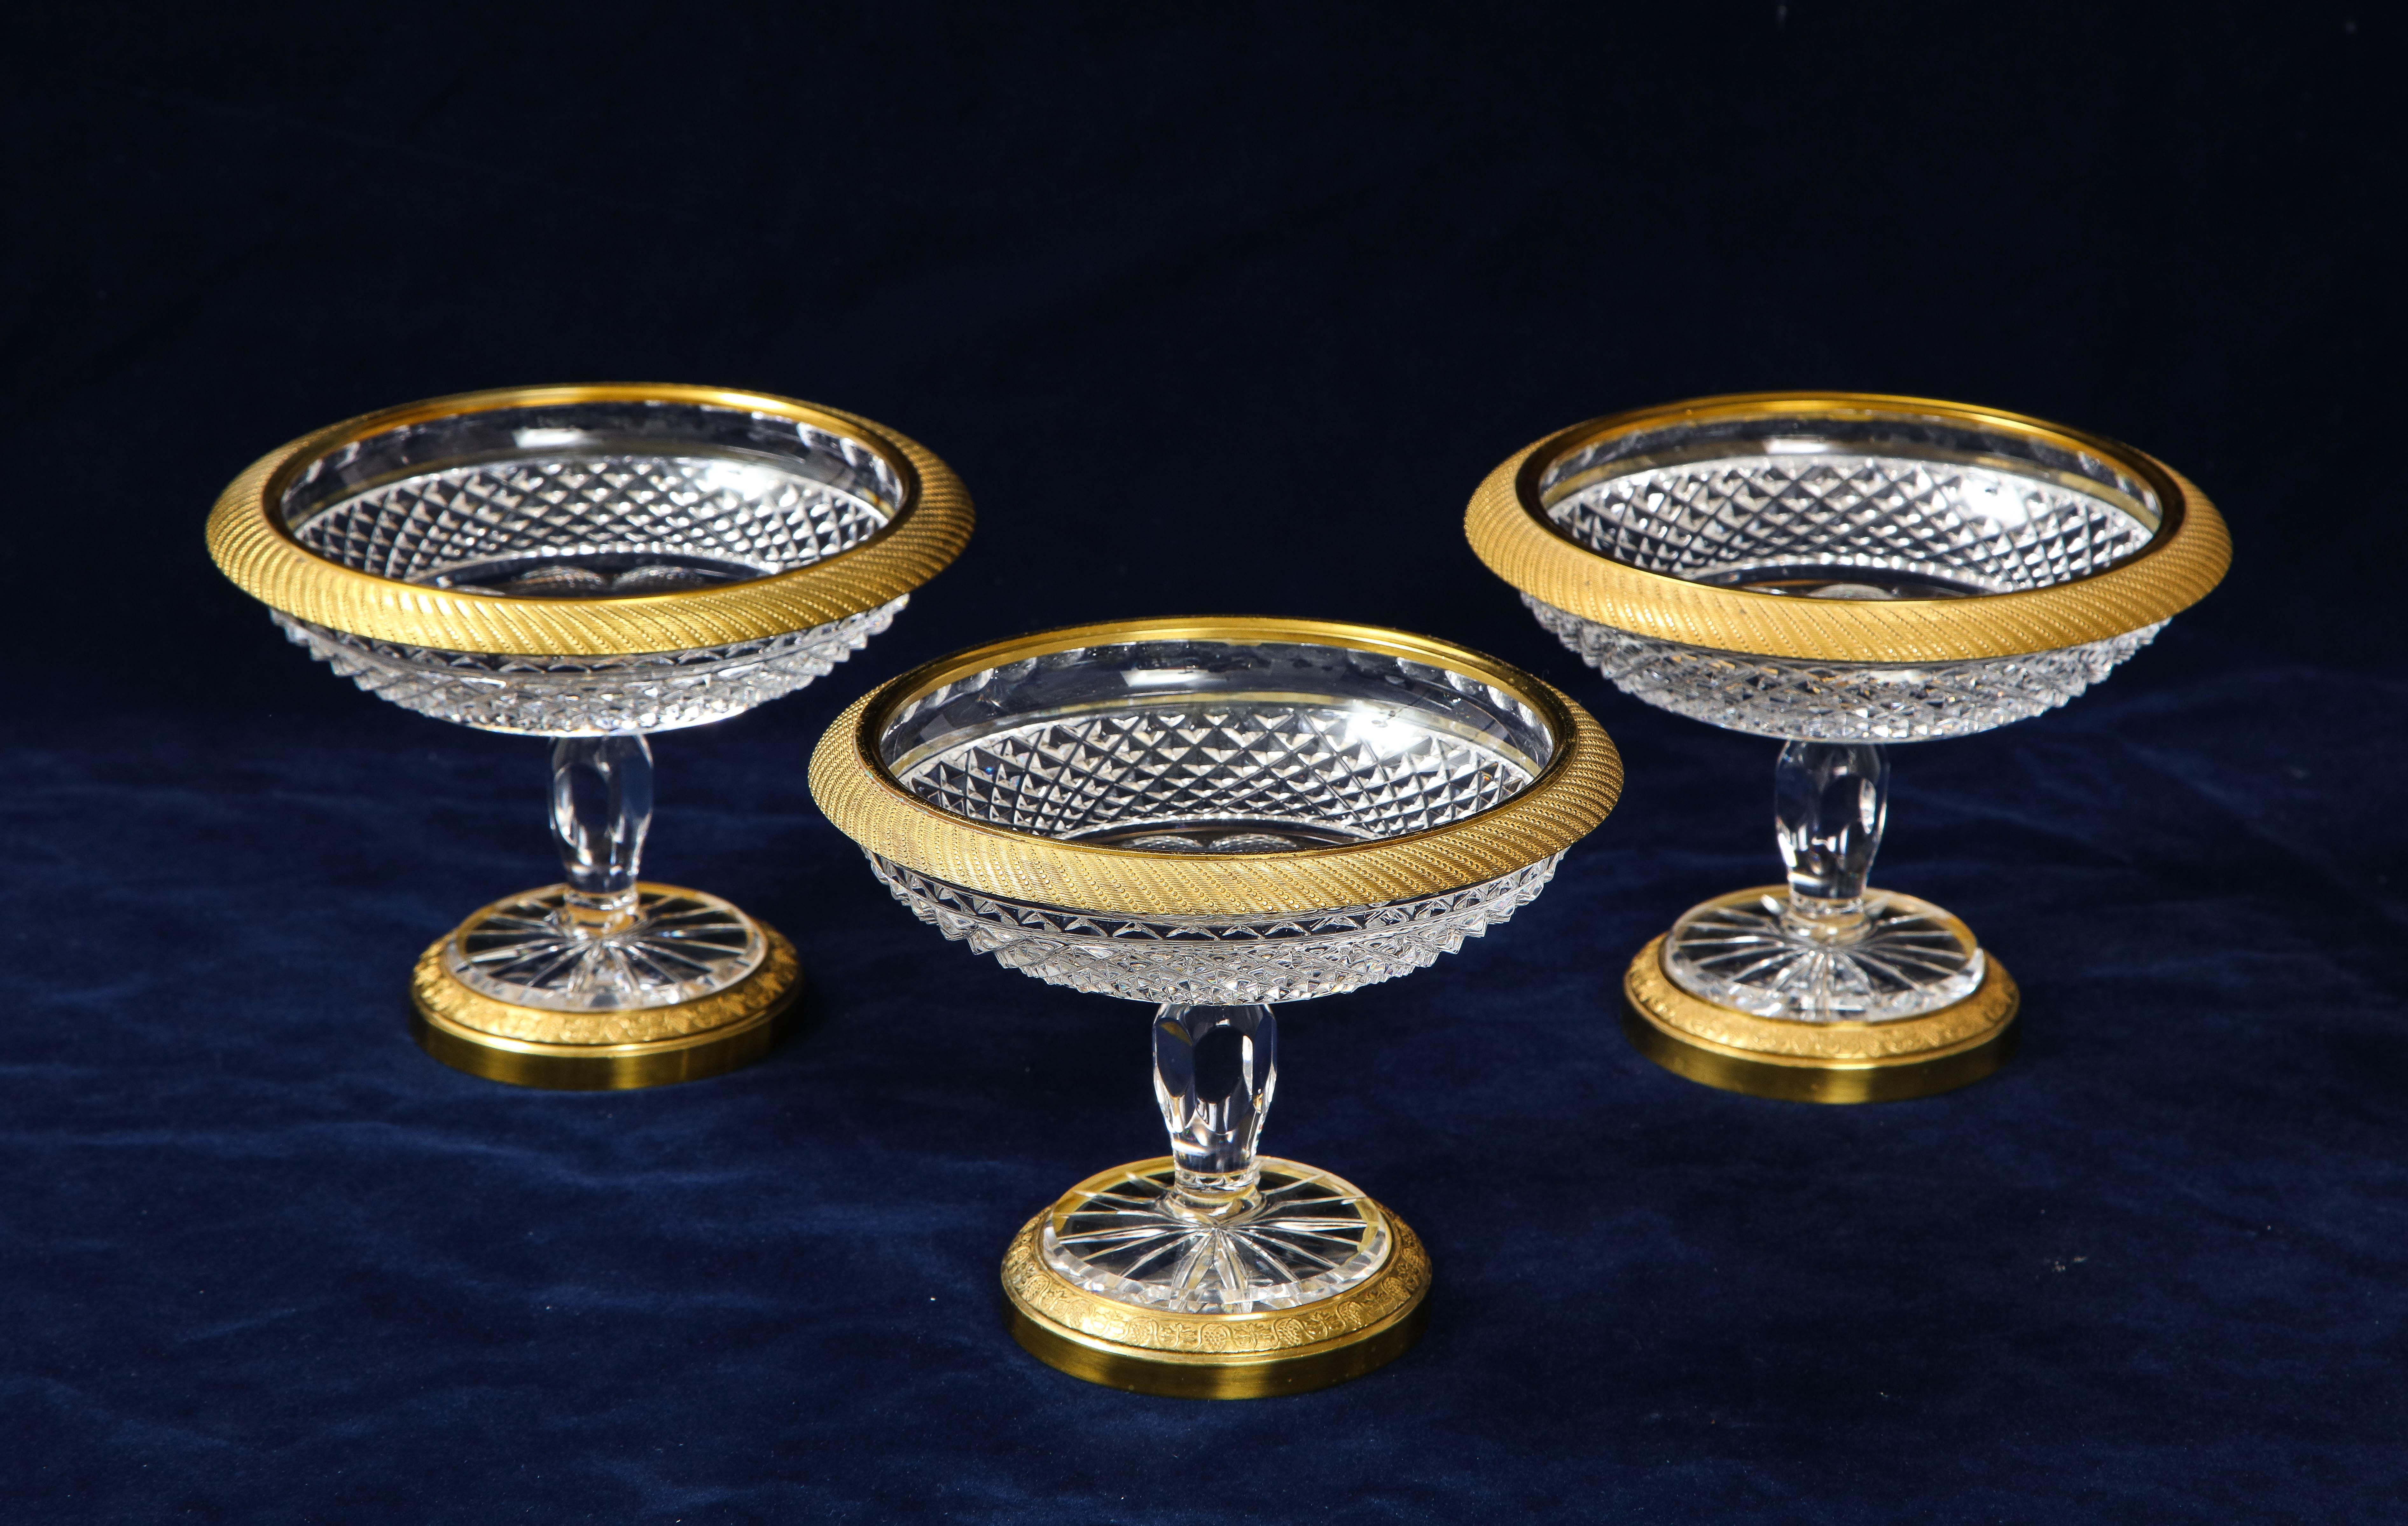 A fabulous set of three French Louis XVI style doré bronze mounted baccarat crystal candy bowls. The crystal of each bowl is beautifully hand diamond-cut with a lattice design and is mounted on a beautiful hand-chased and hand-chiseled doré bronze